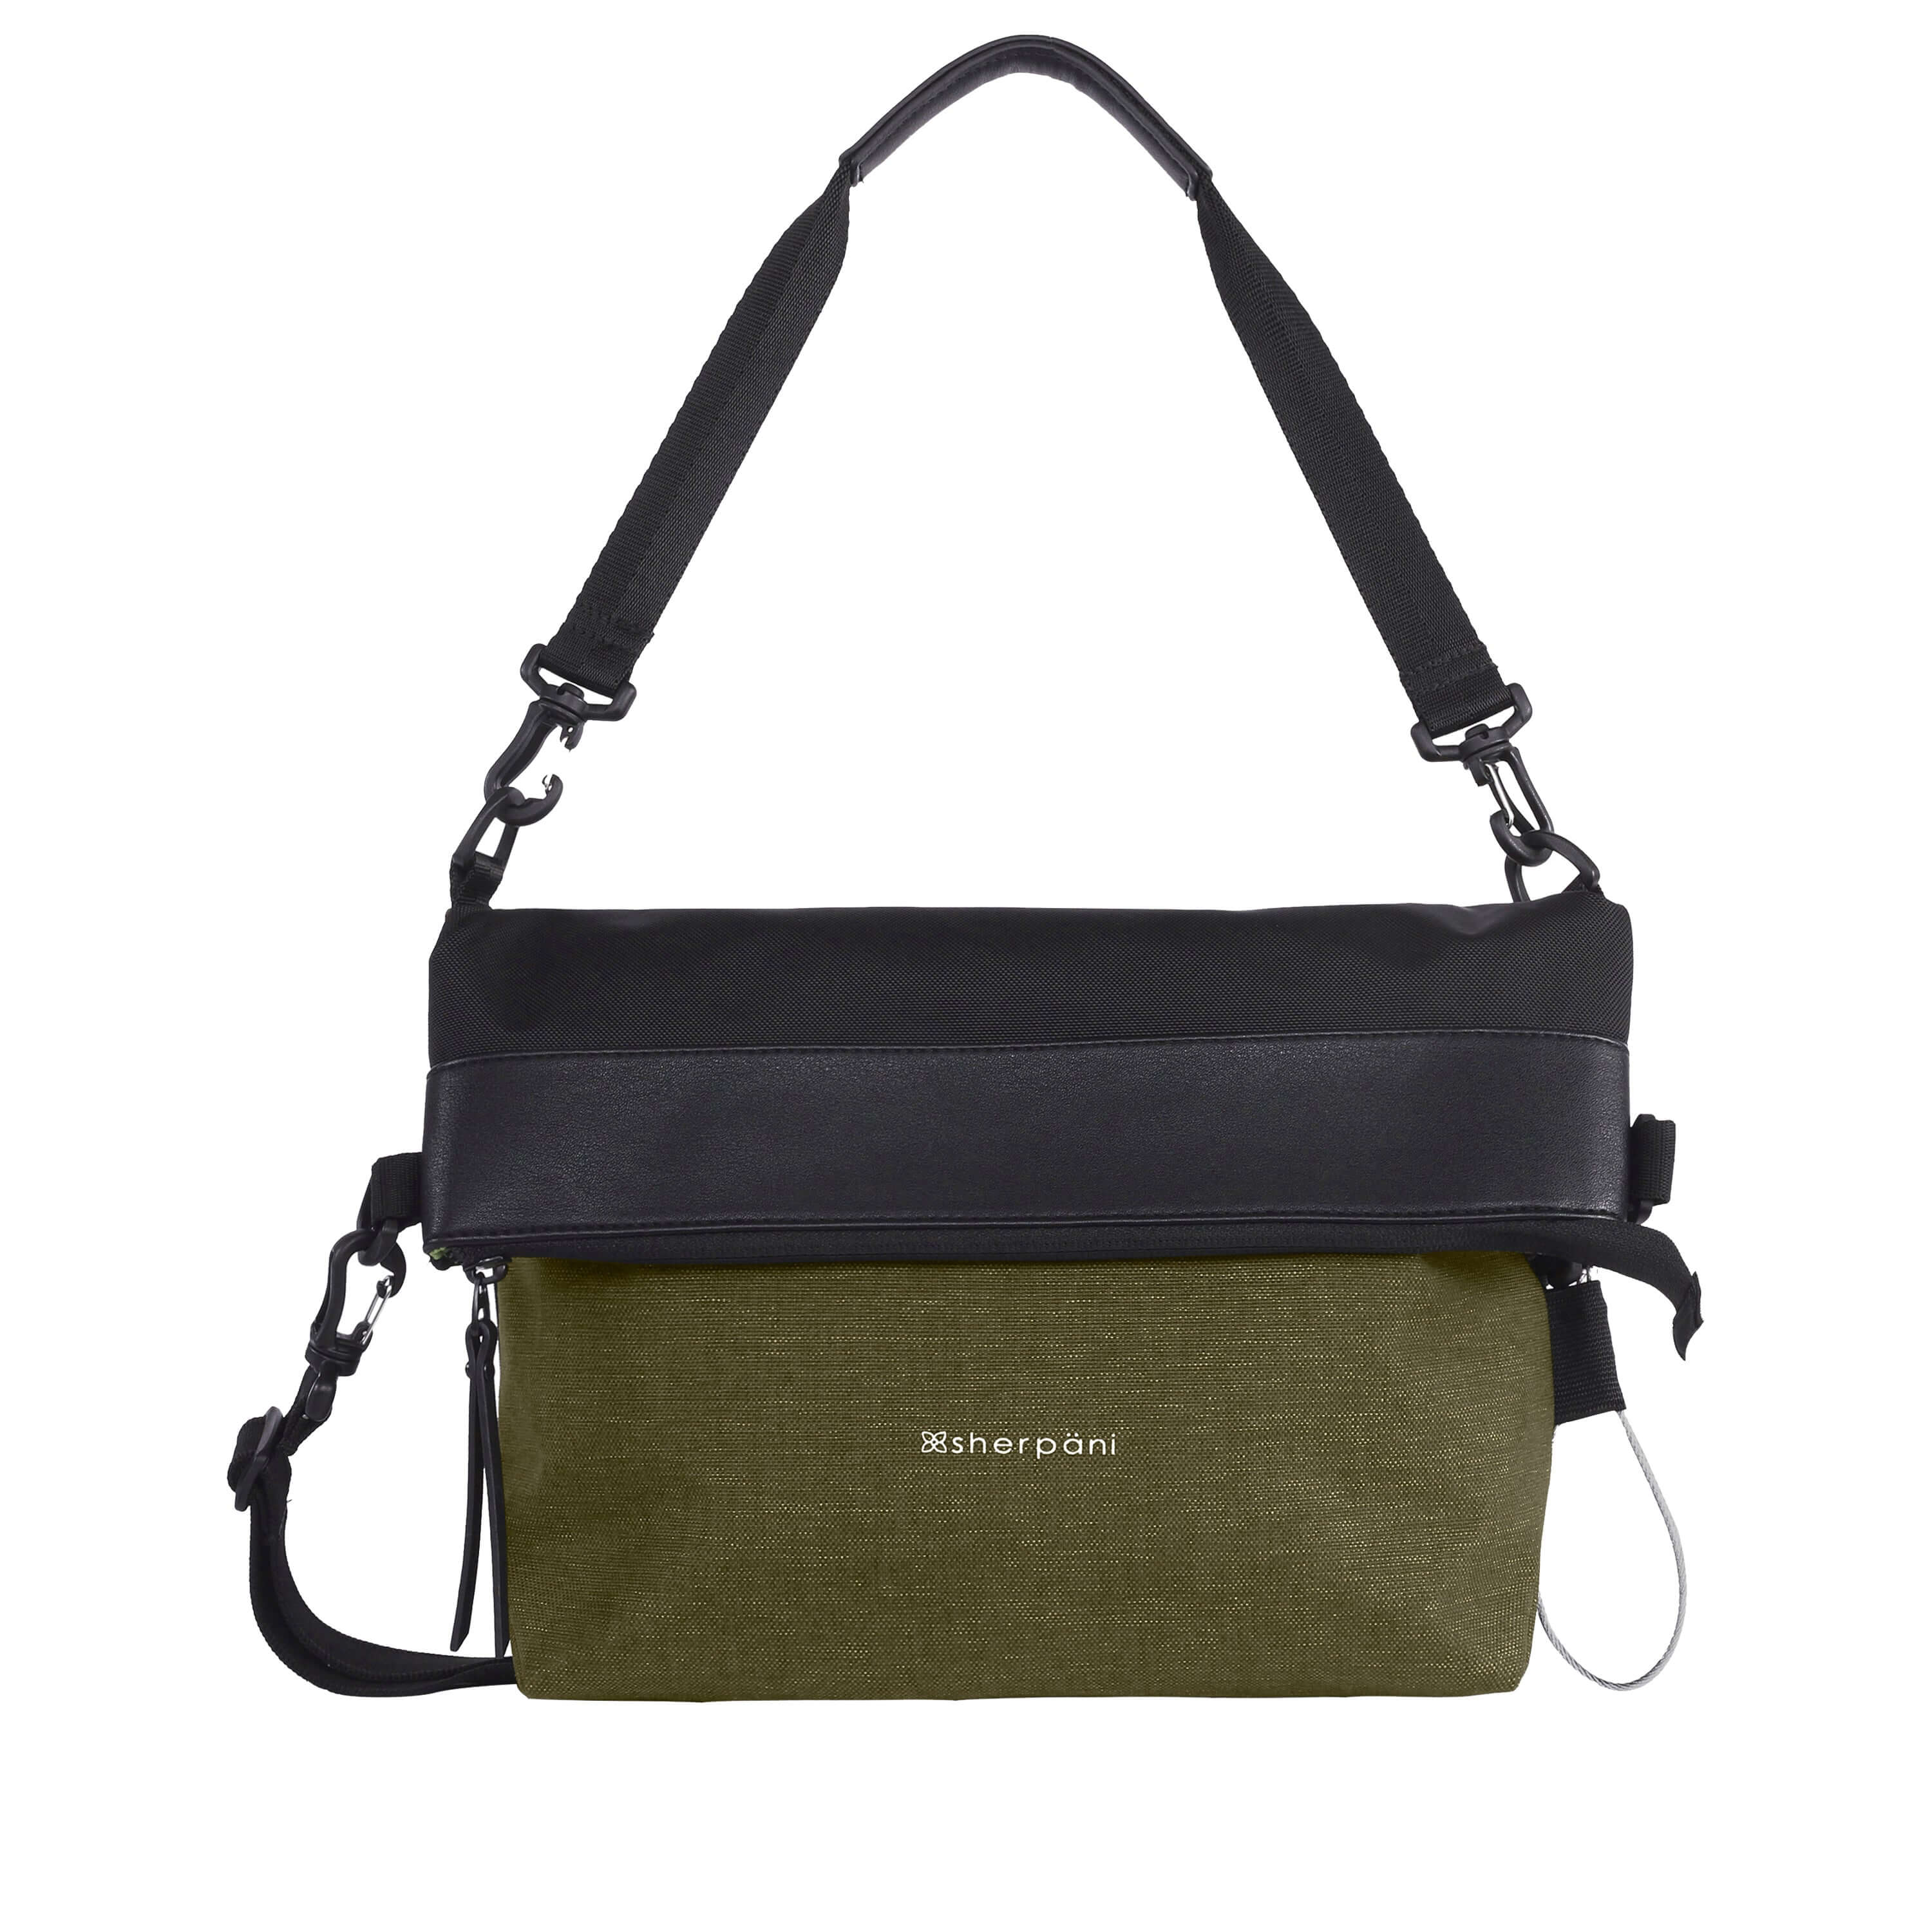 Flat front view of Sherpani's Anti-Theft bag, the Vale AT in Loden with vegan leather accents in black. The top is folded over creating a two-toned reversible overlap. A chair loop lock is clipped onto one side, secured in place by an elastic tab. It has an adjustable/detachable crossbody strap, and a second detachable strap fixed at a shorter length. 